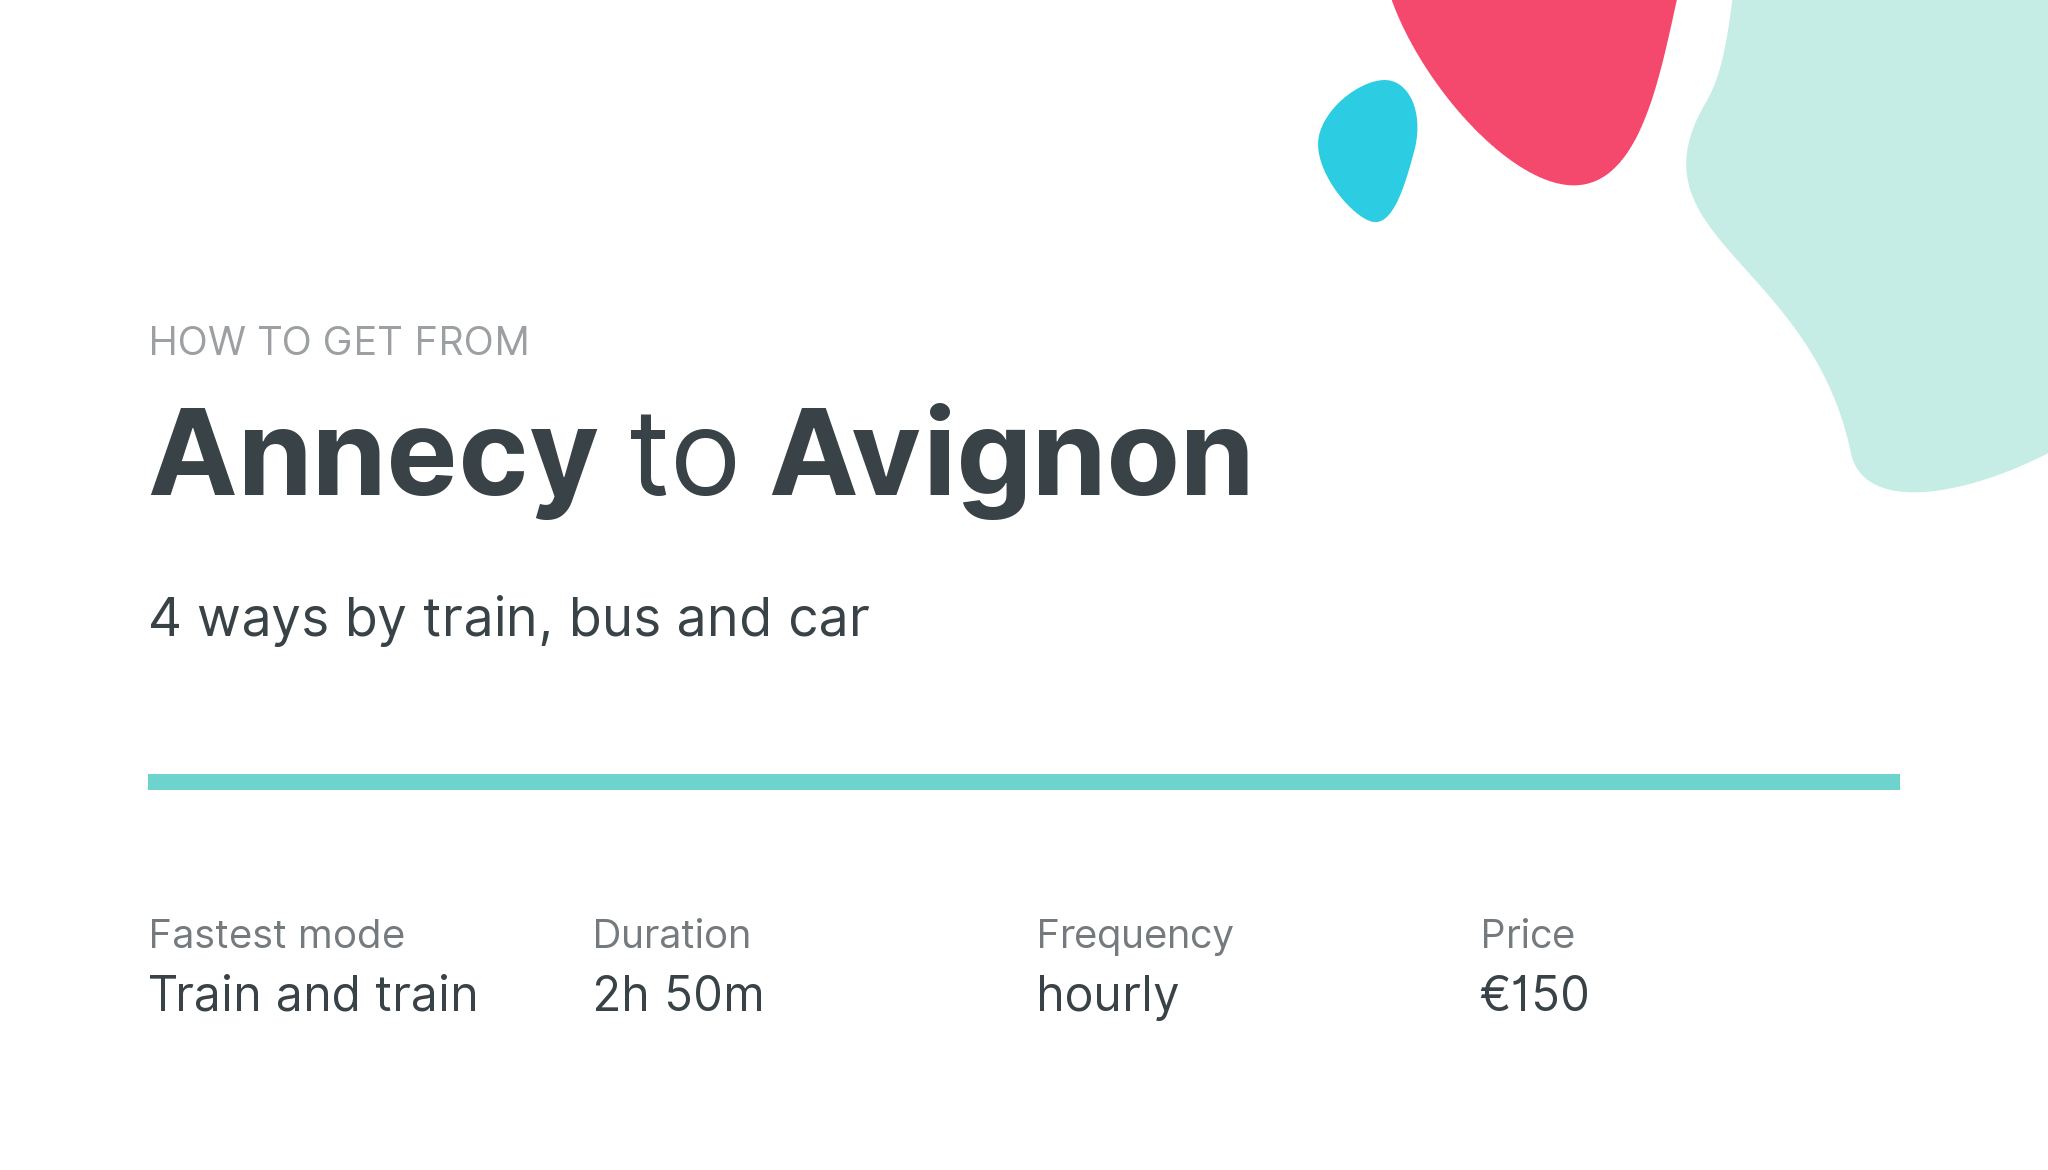 How do I get from Annecy to Avignon